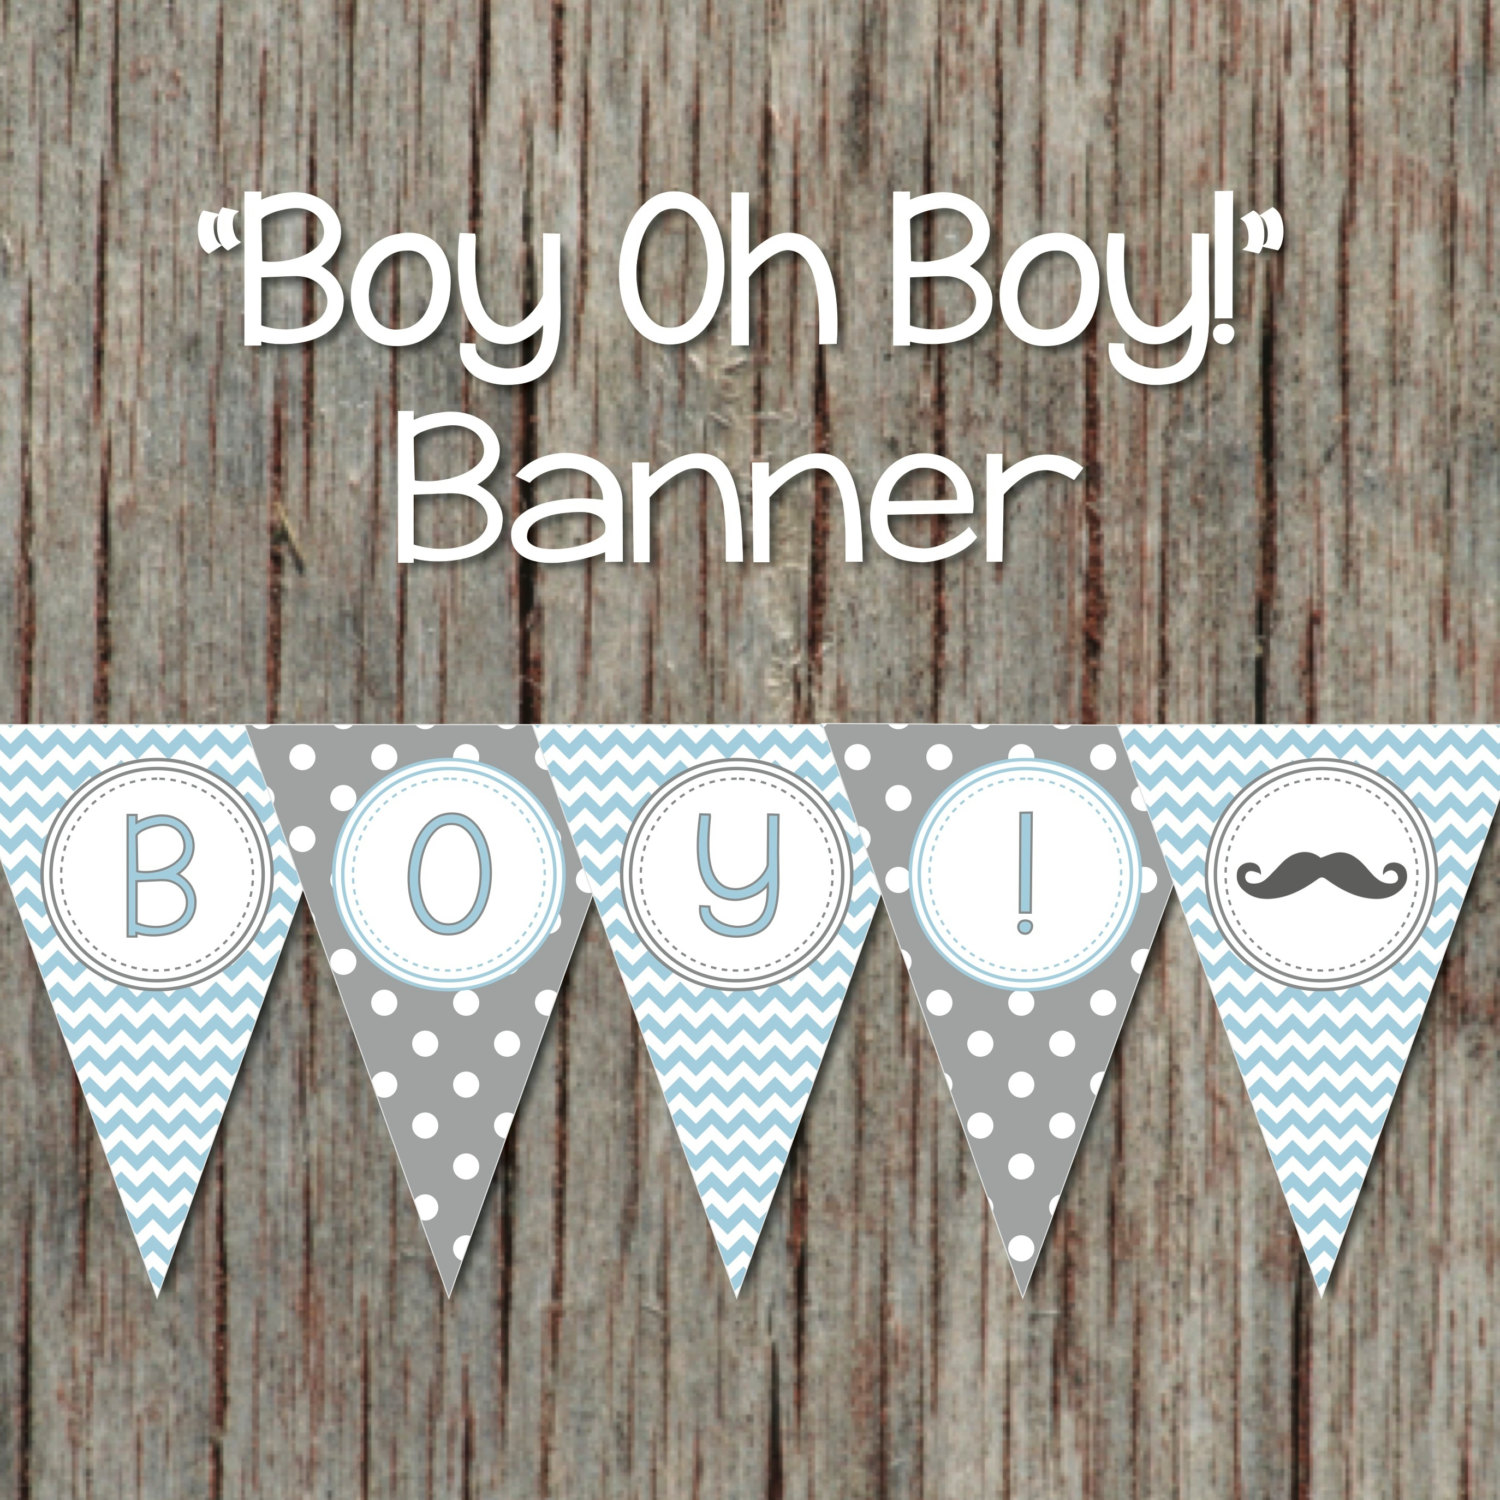 Full Size of Baby Shower:89+ Indulging Baby Shower Banner Picture Inspirations Baby Shower Banner Or Unique Baby Shower With Baby Shower Hairstyles Plus Juegos Para Baby Shower Together With Baby Shower Decorations As Well As Baby Shower Giveaways And Baby Shower Desserts